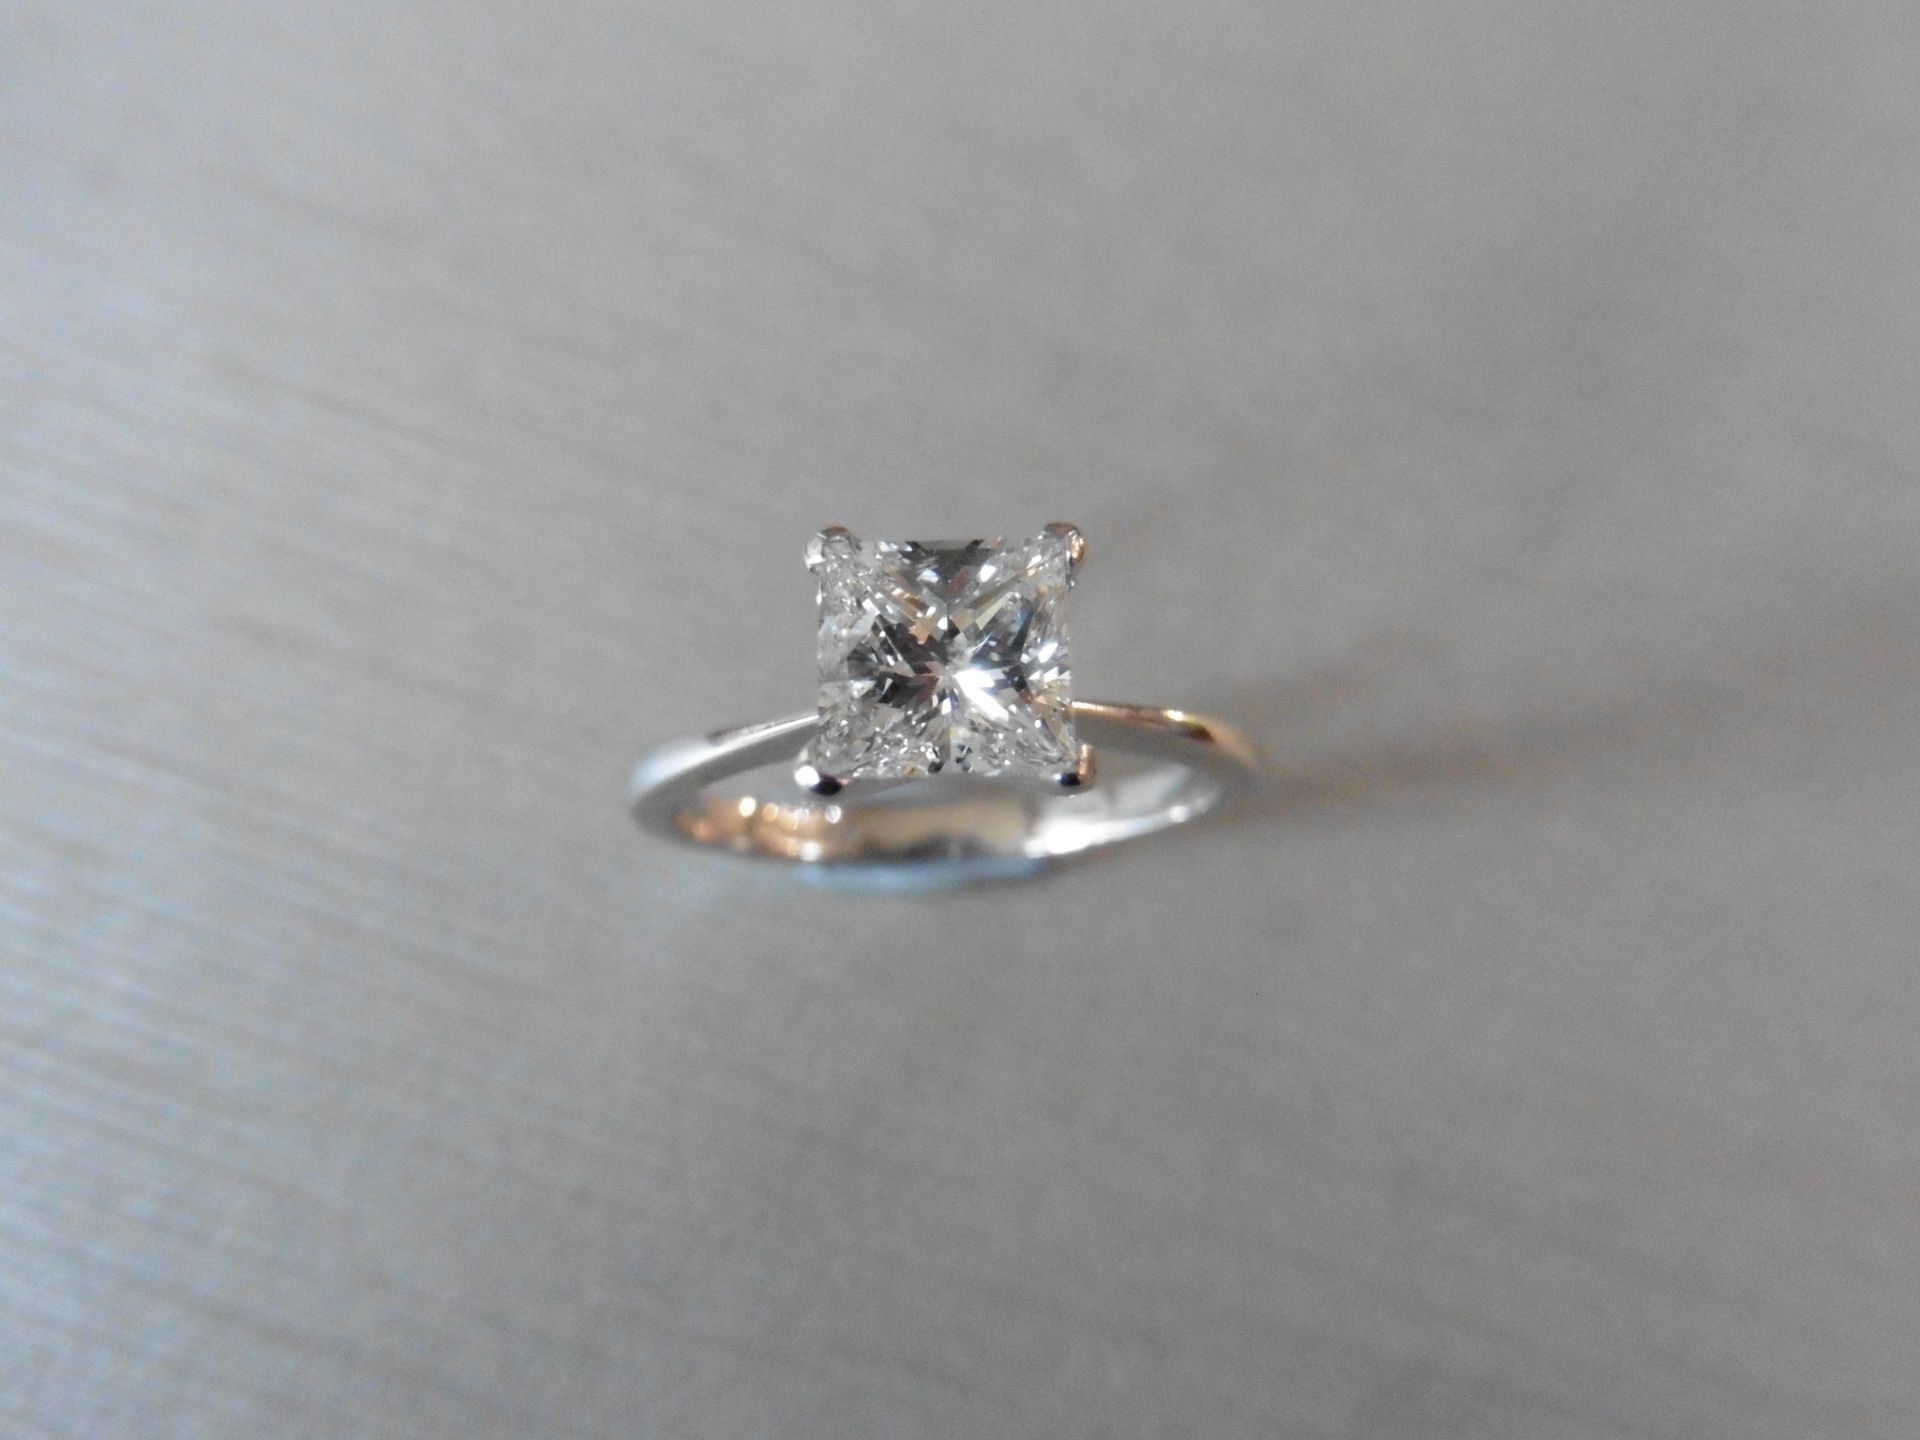 0.90ct princess cut diamond solitaire ring. H colour, si clarity. This diamond has been enhanced. - Image 2 of 4